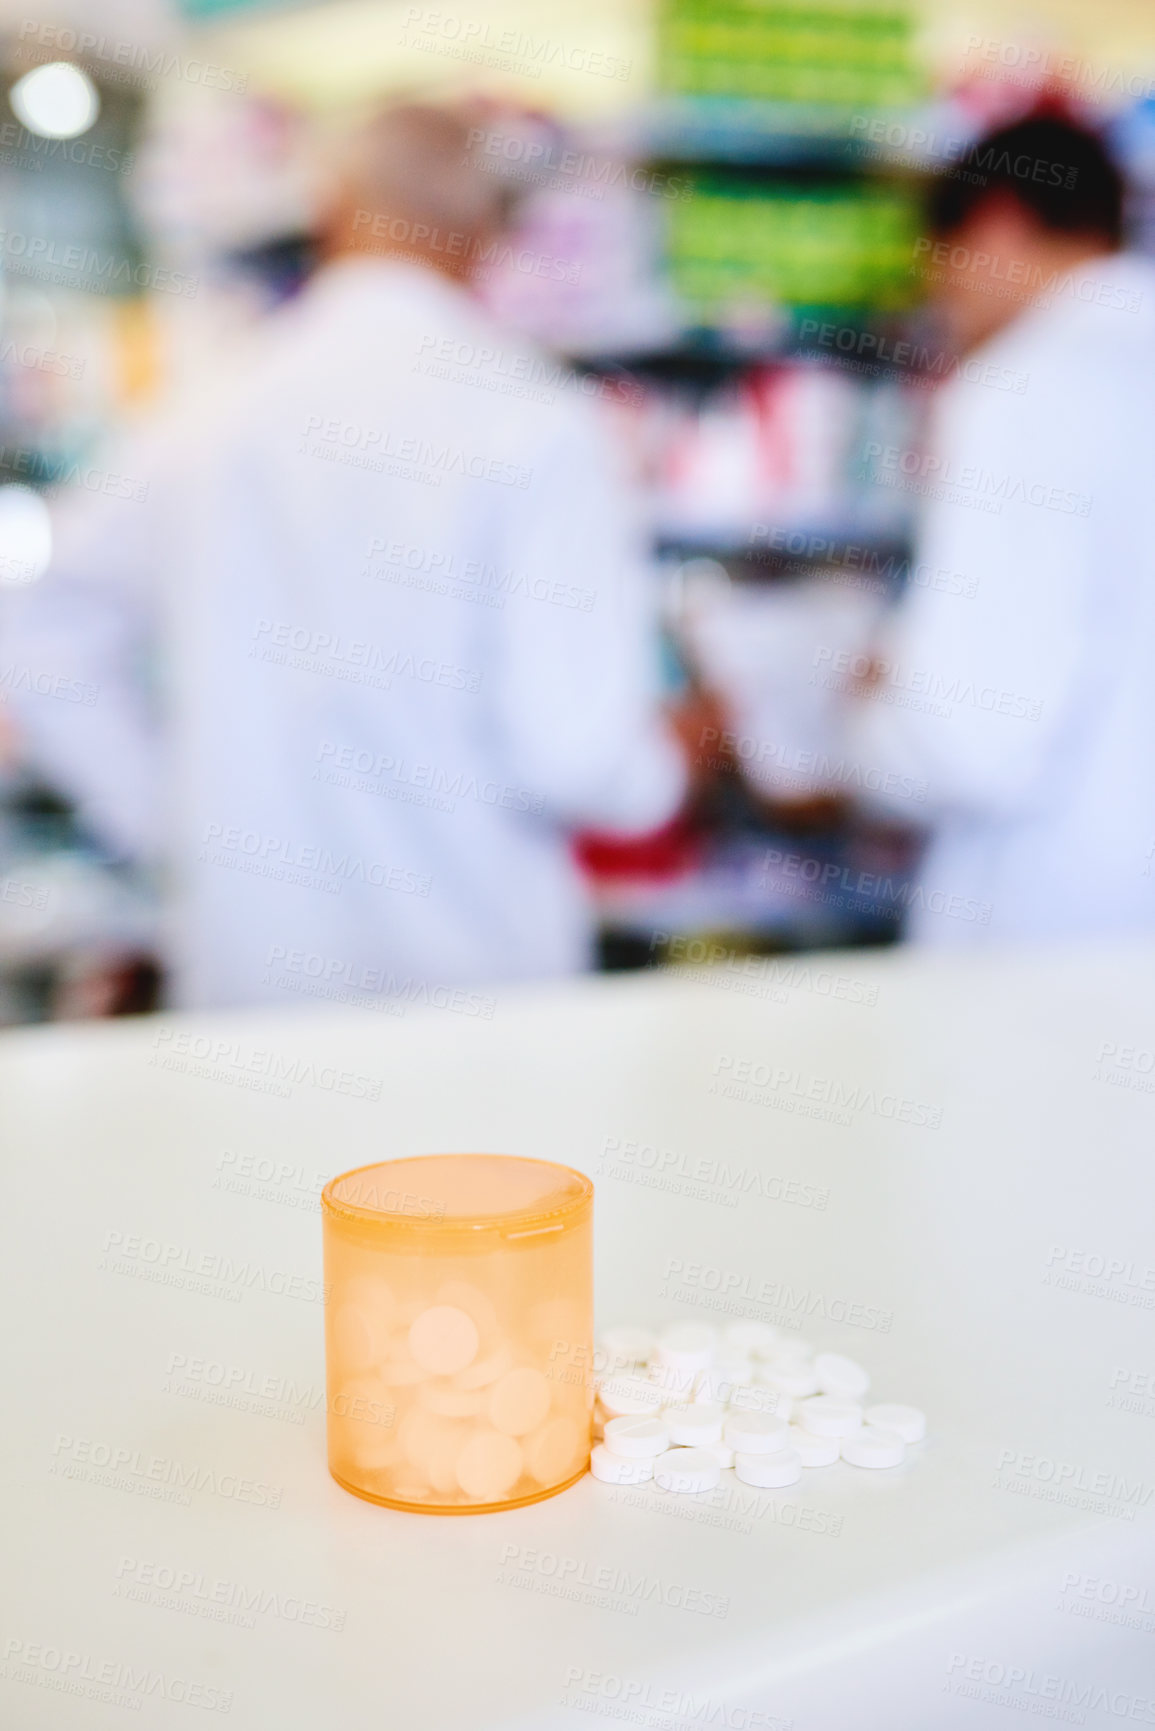 Buy stock photo Shot of a container filed with medication on a counter in a pharmacy